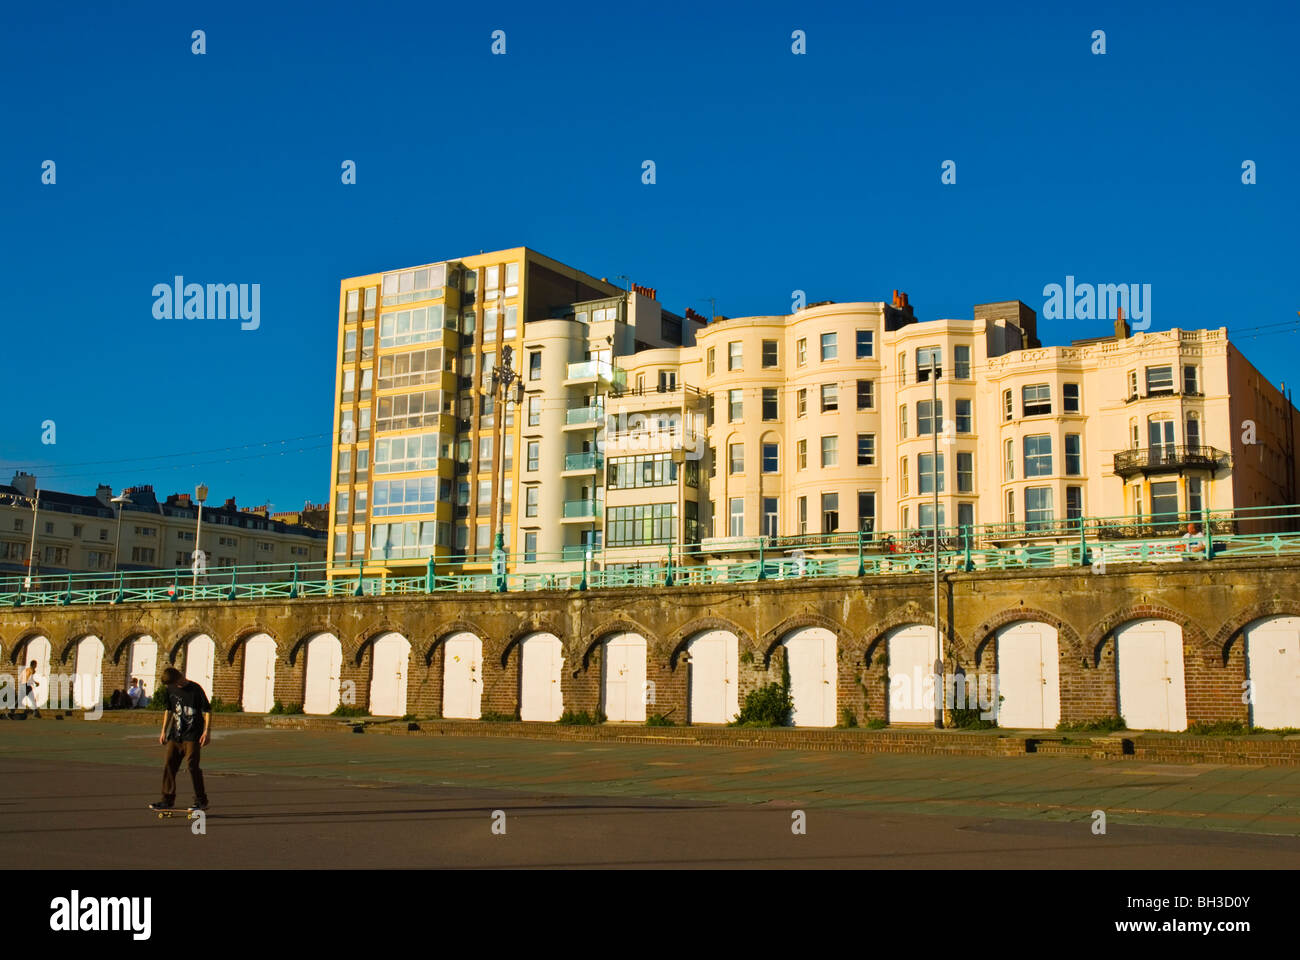 Skater in front King's Road Arches on beach esplanade Brighton England UK Europe Stock Photo